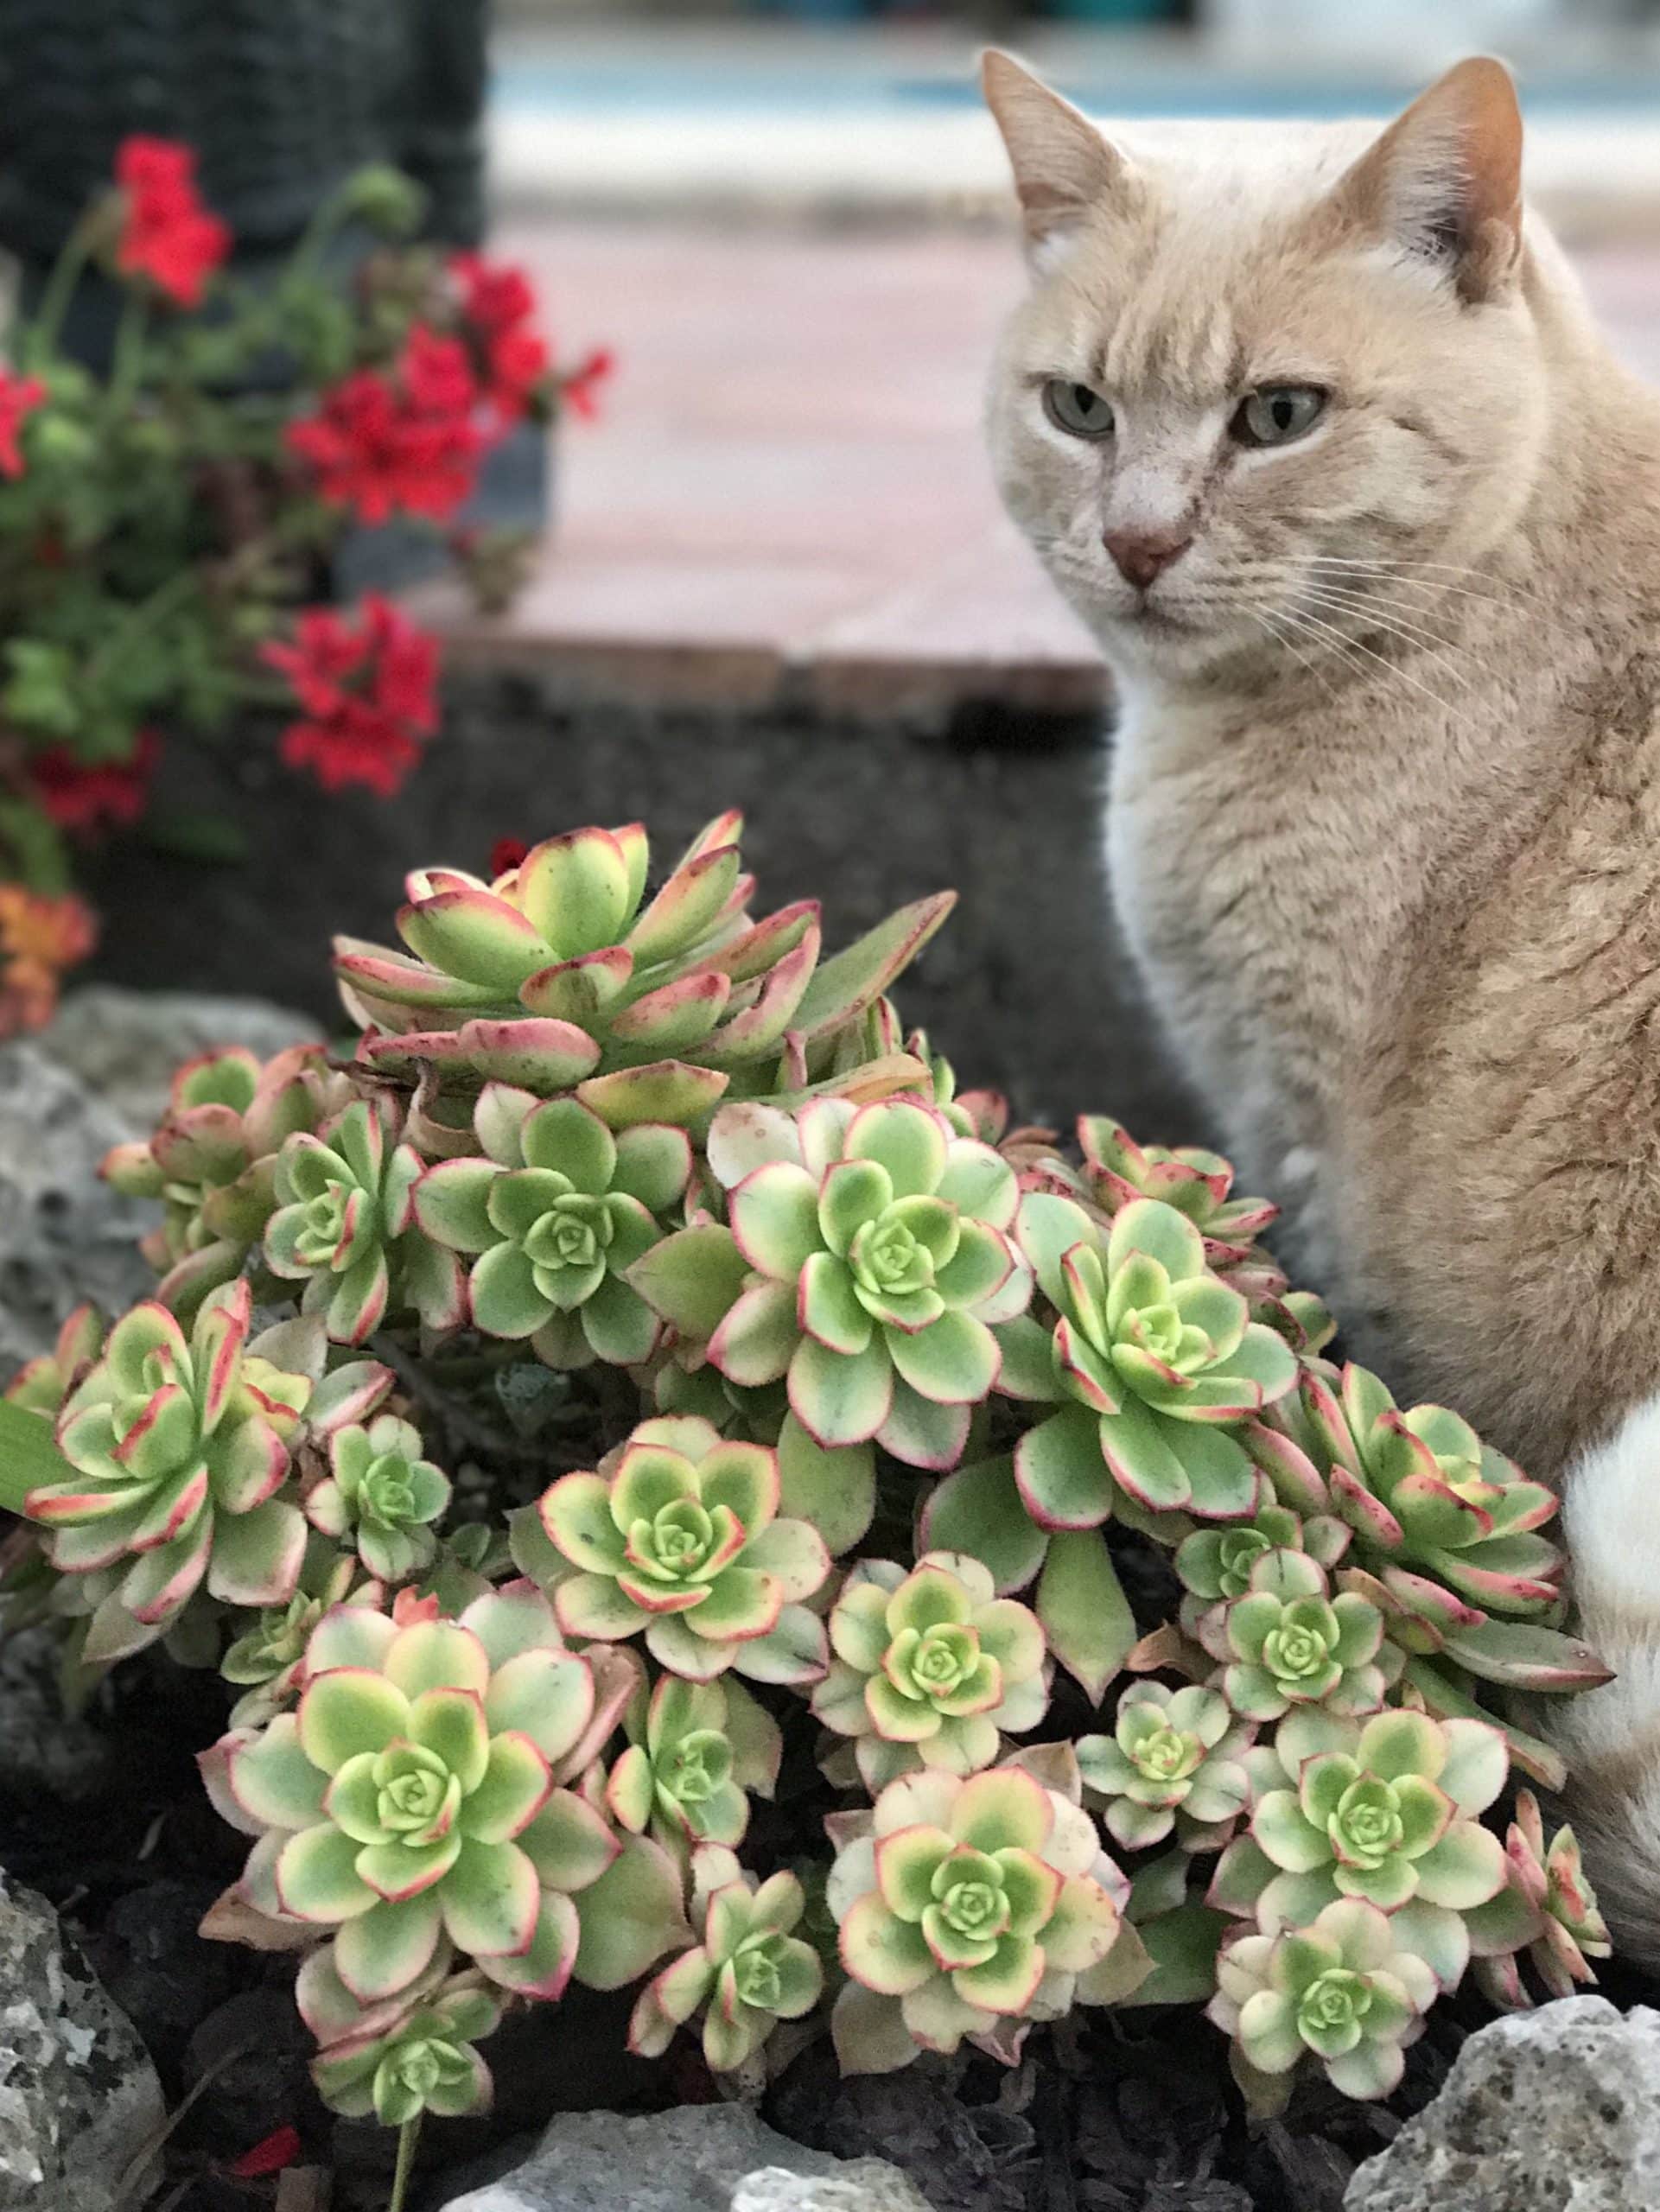 Are Cactuses Poisonous To Cats?